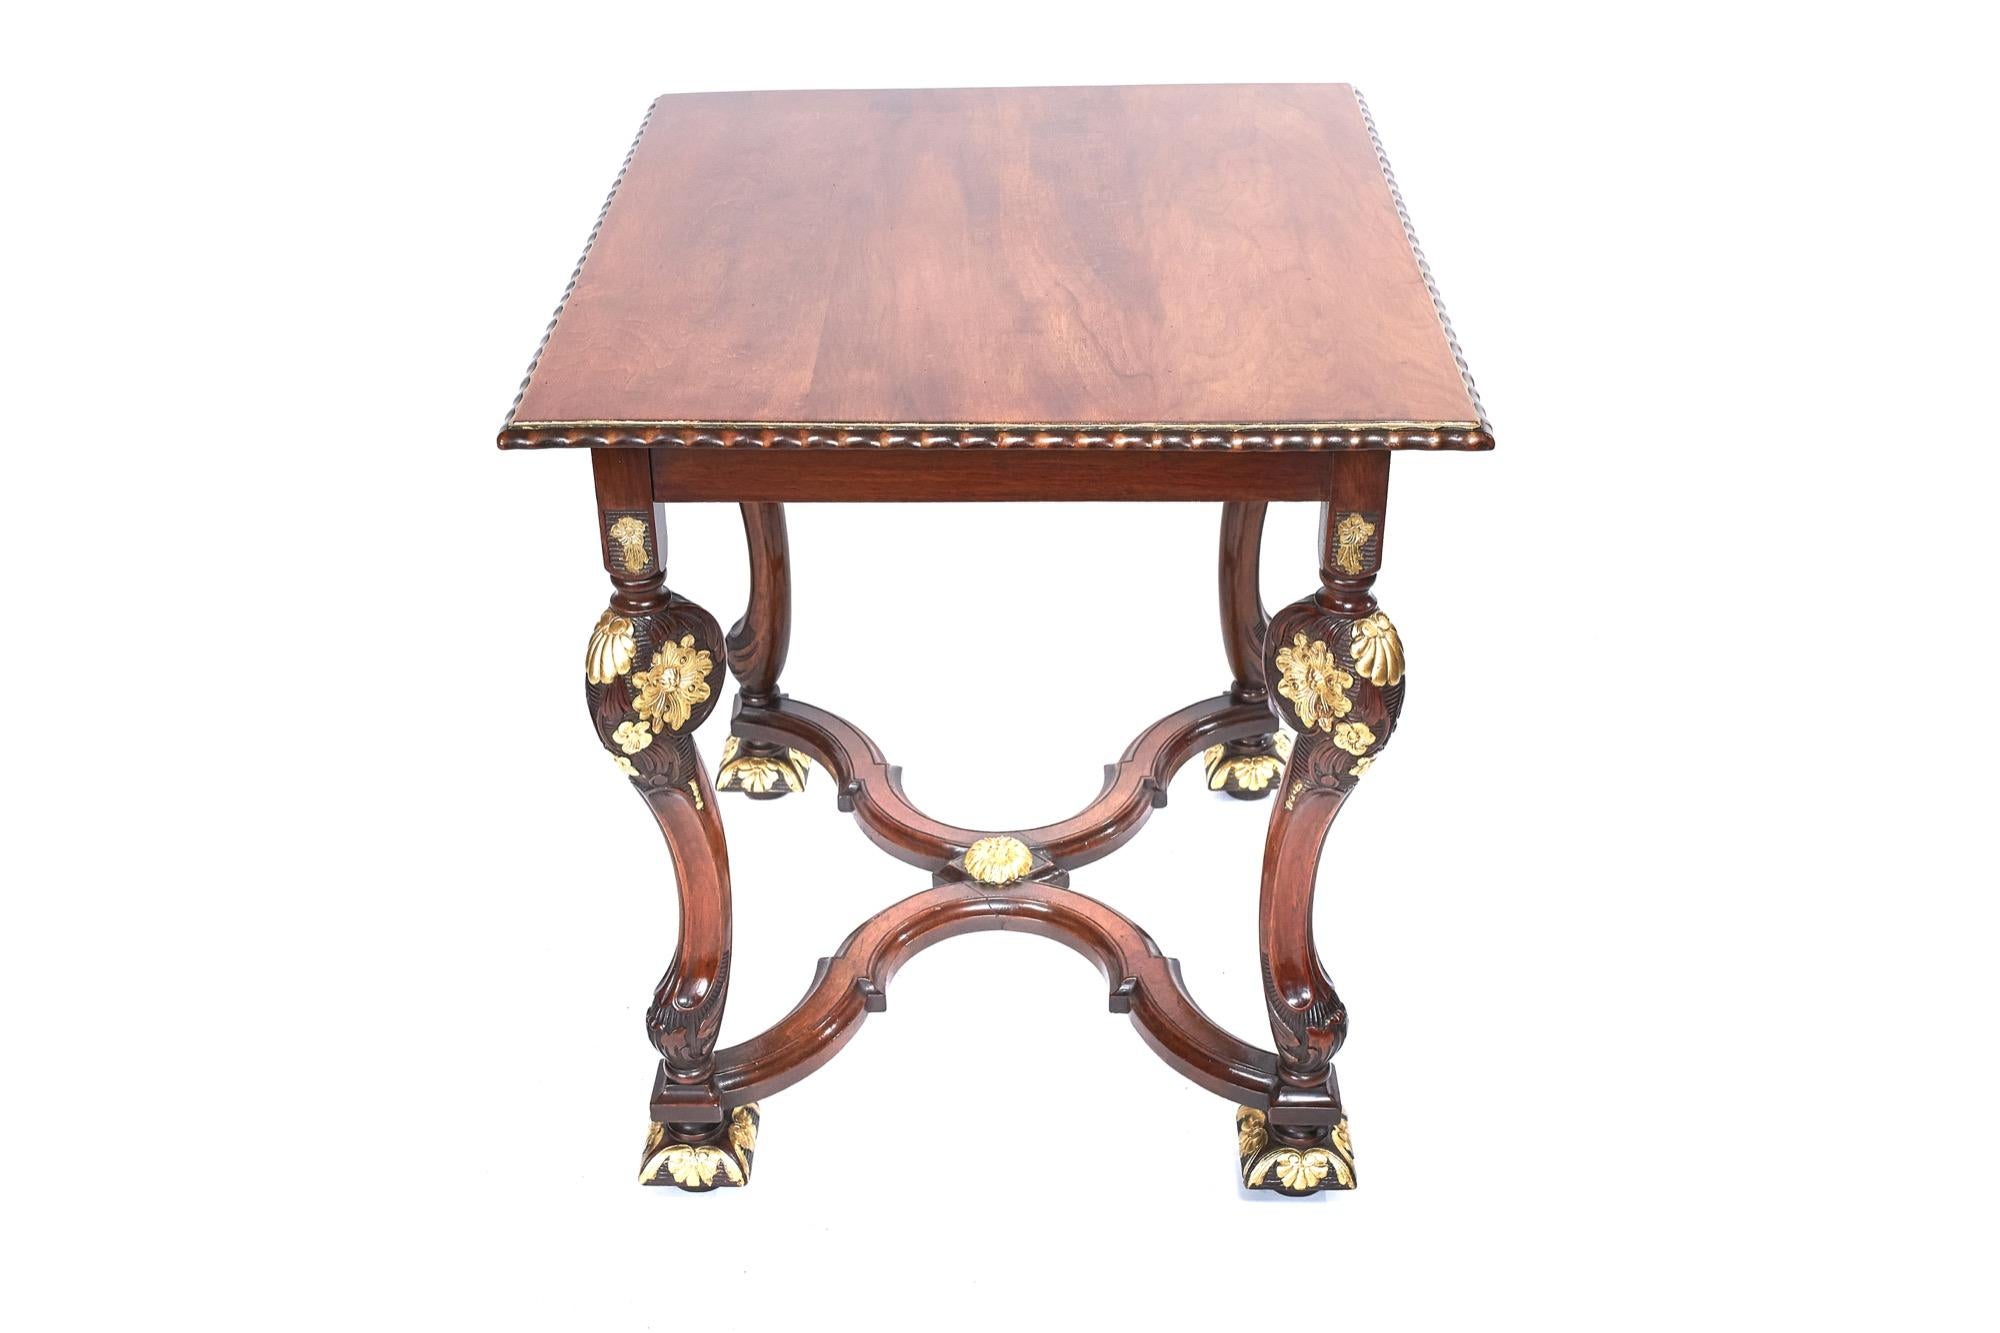 English William & Mary Revival Walnut Centre Table with Parcel Gilt Decoration For Sale